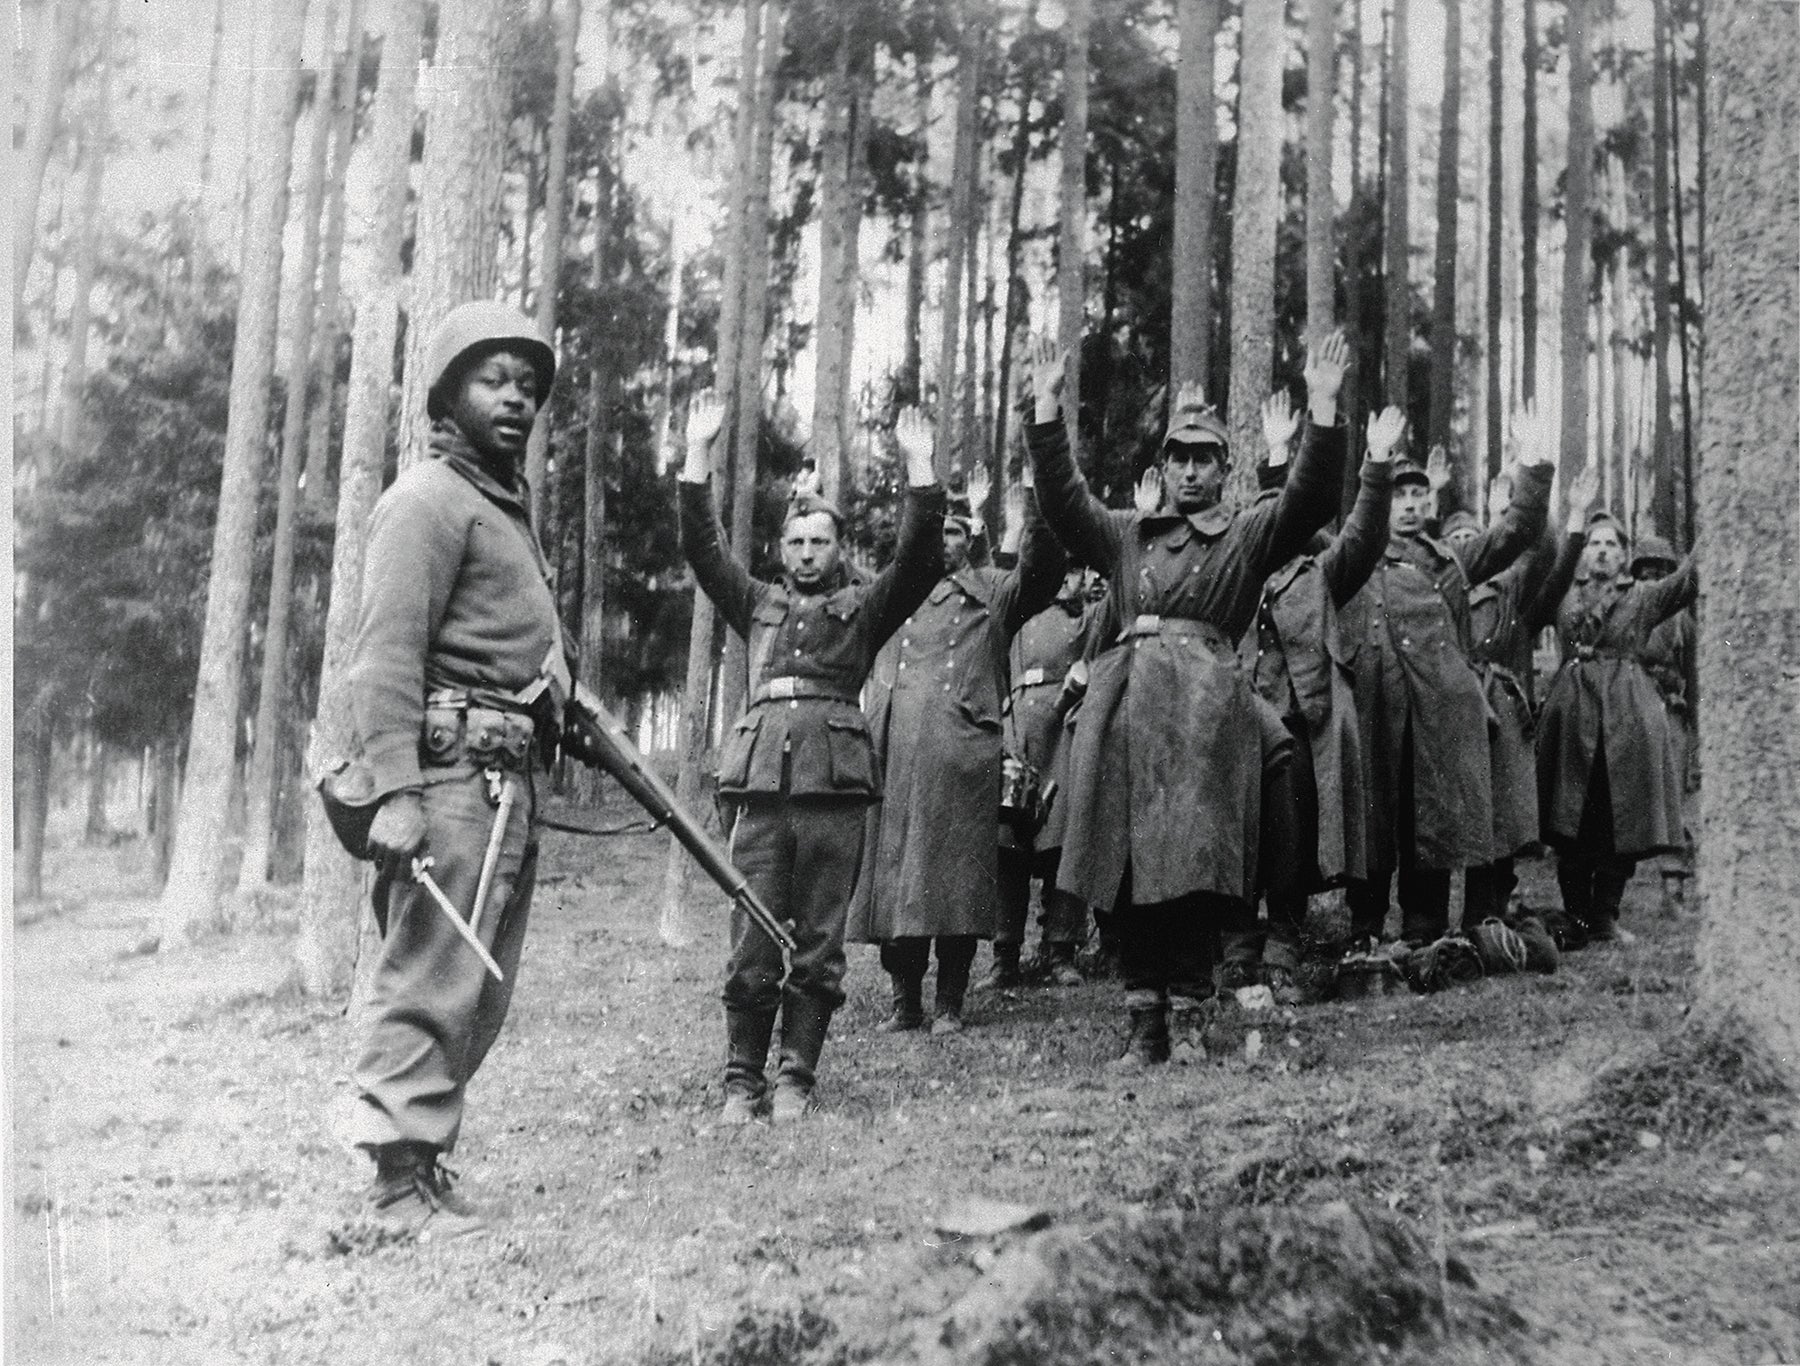 A soldier with the 12th Armored Division guards German prisoners of war in April 1945.